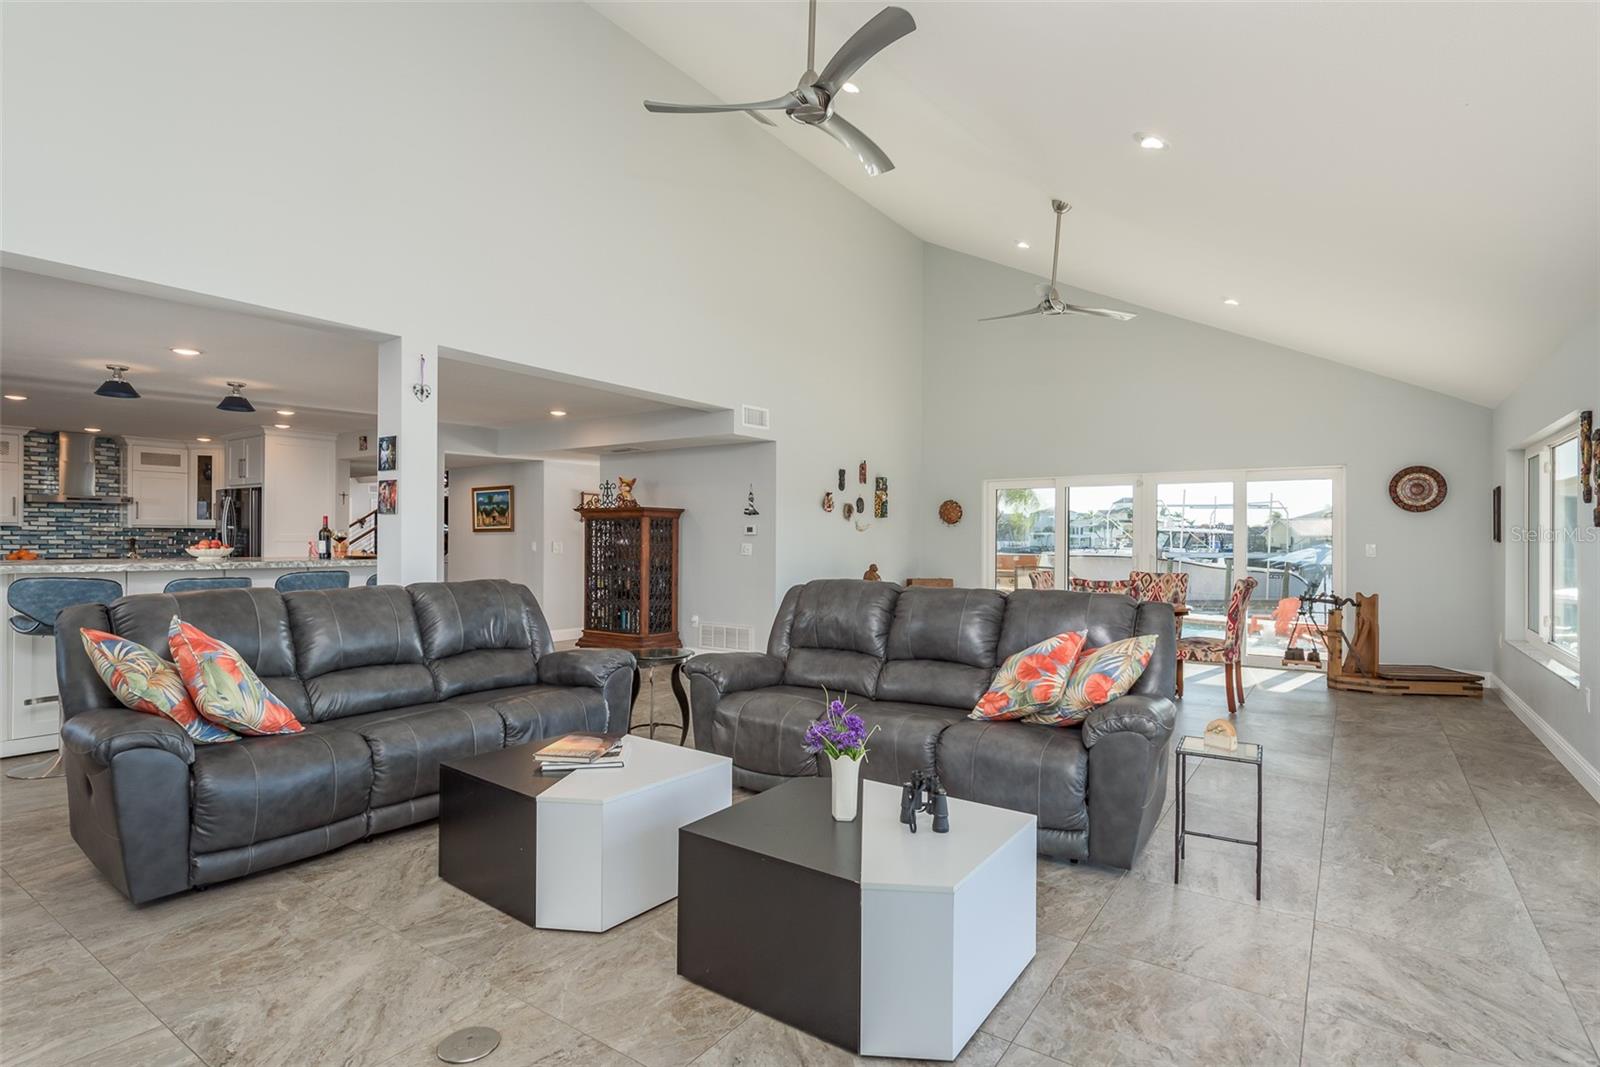 Spacious Great Room is perfect for entertaining Family & Friends